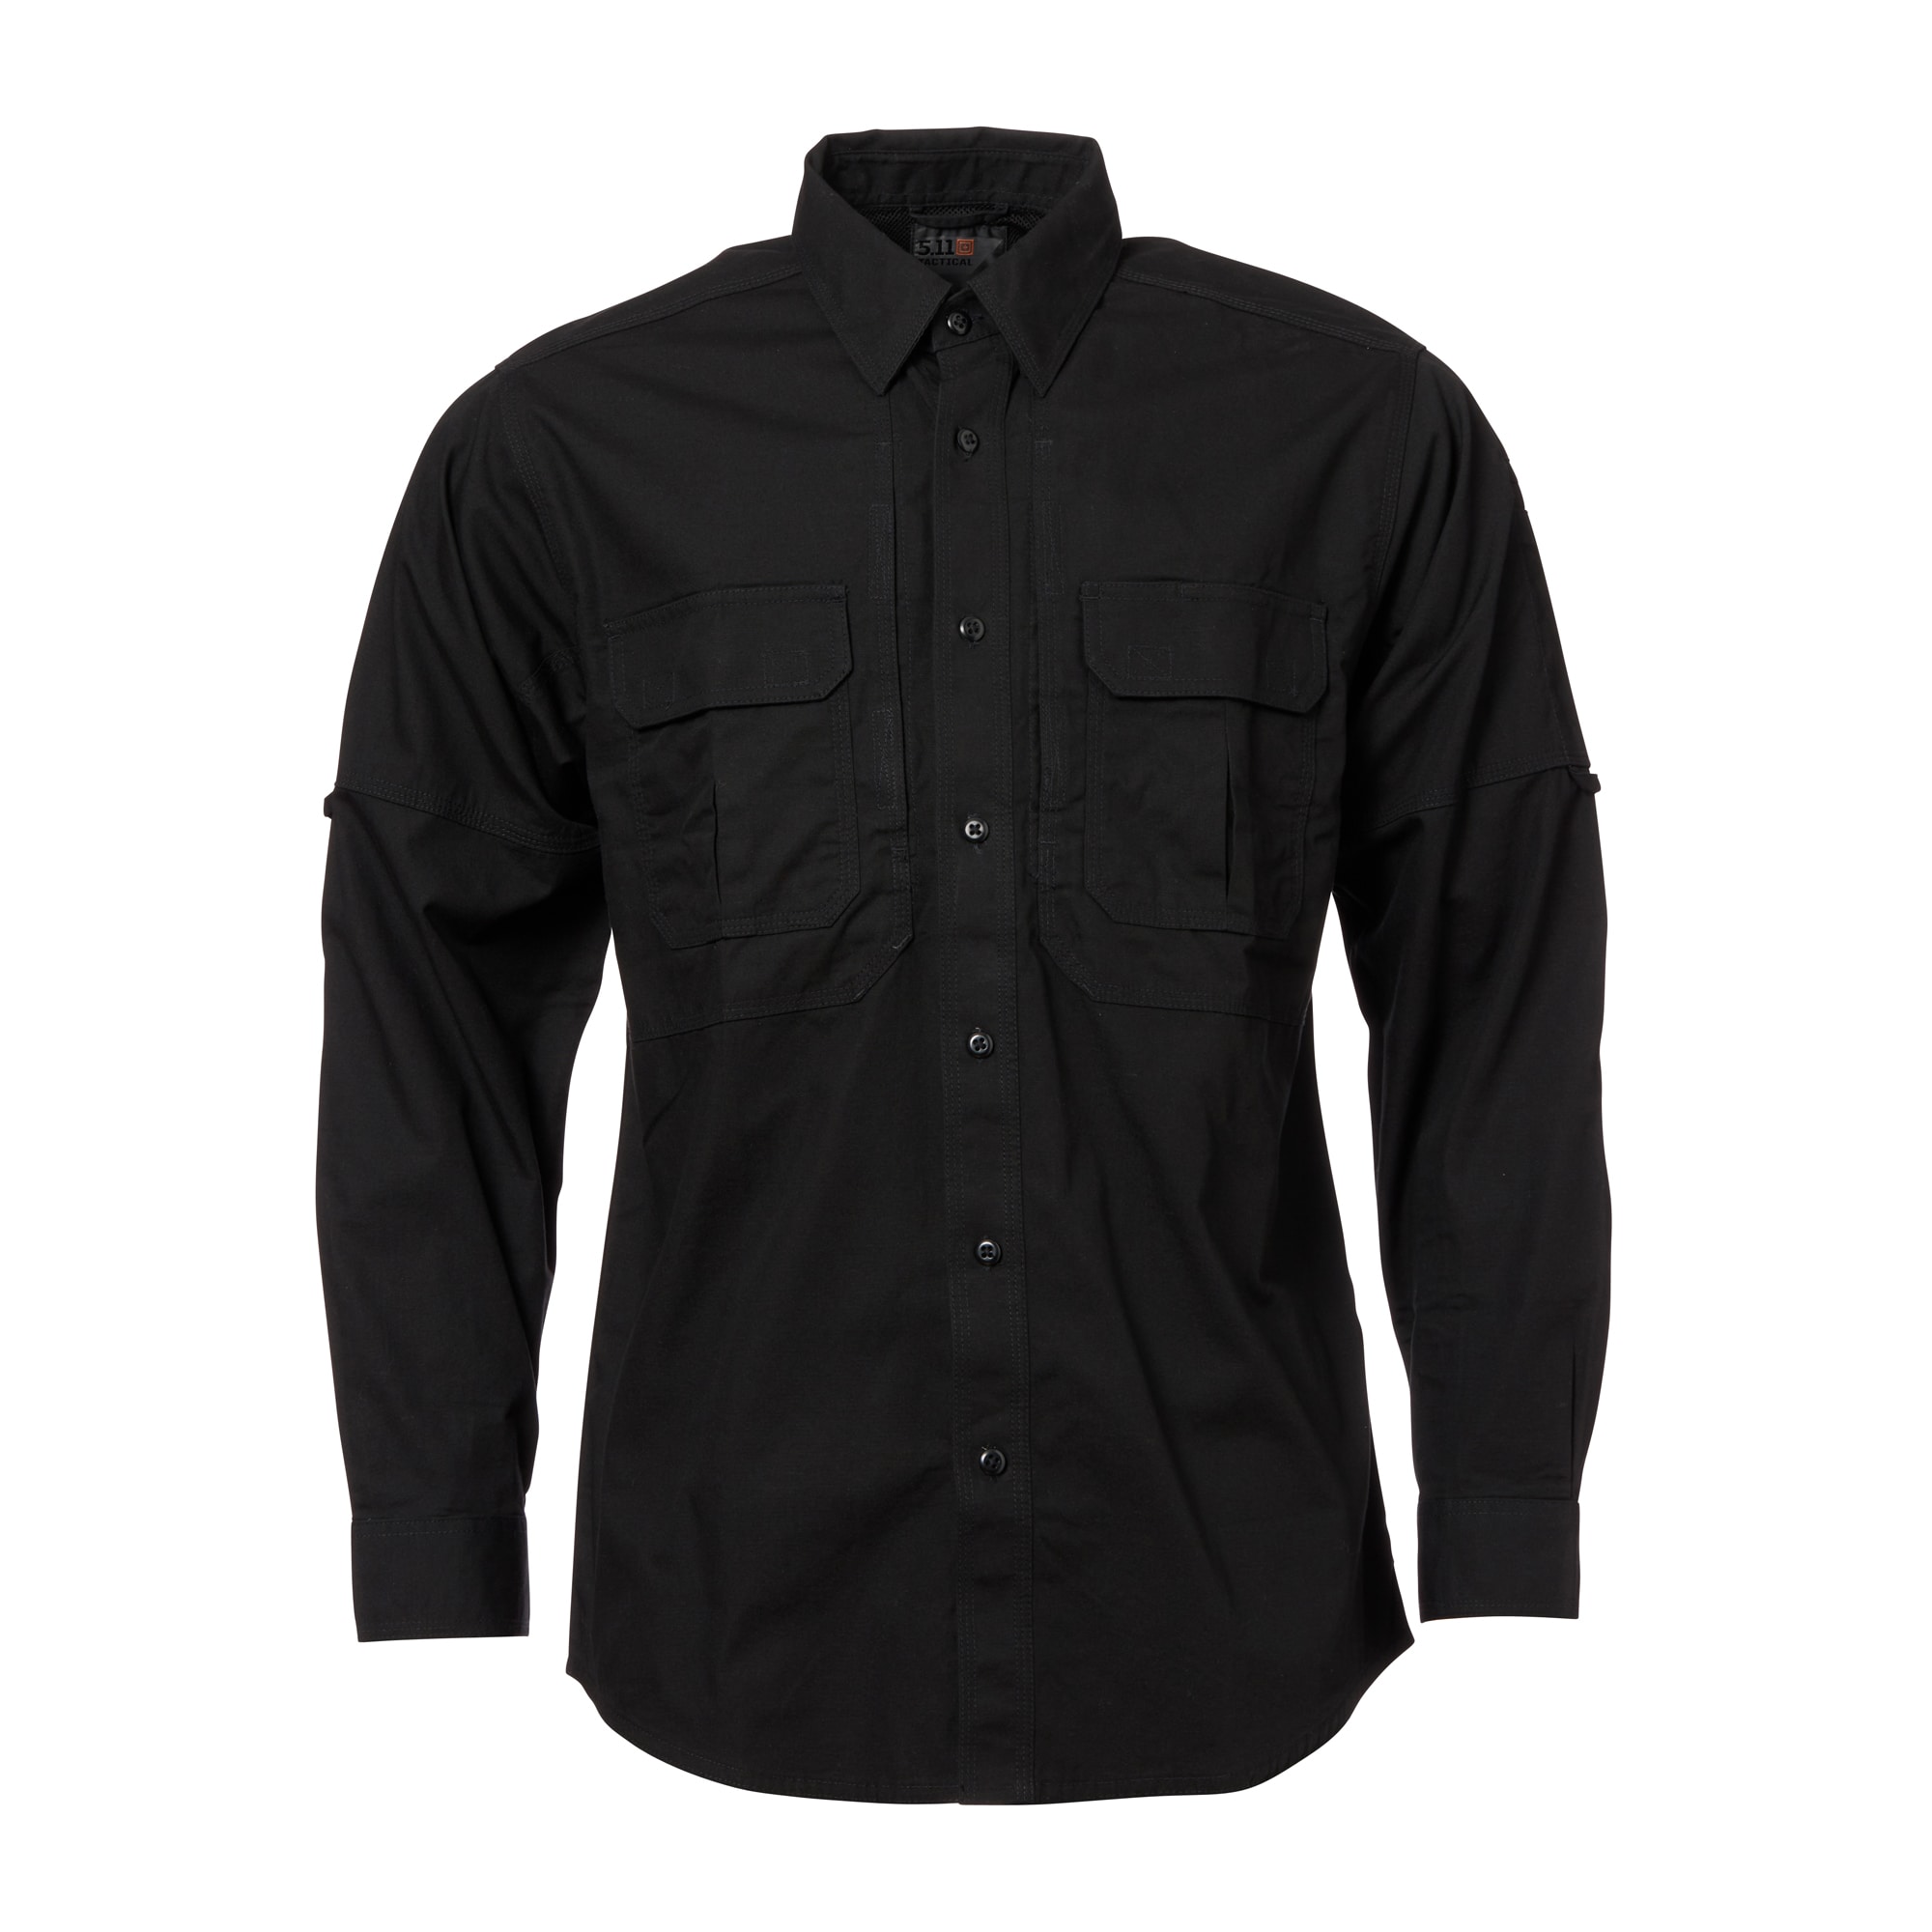 Purchase the 5.11 Tactical Shirt Long Sleeve Cotton black by ASM